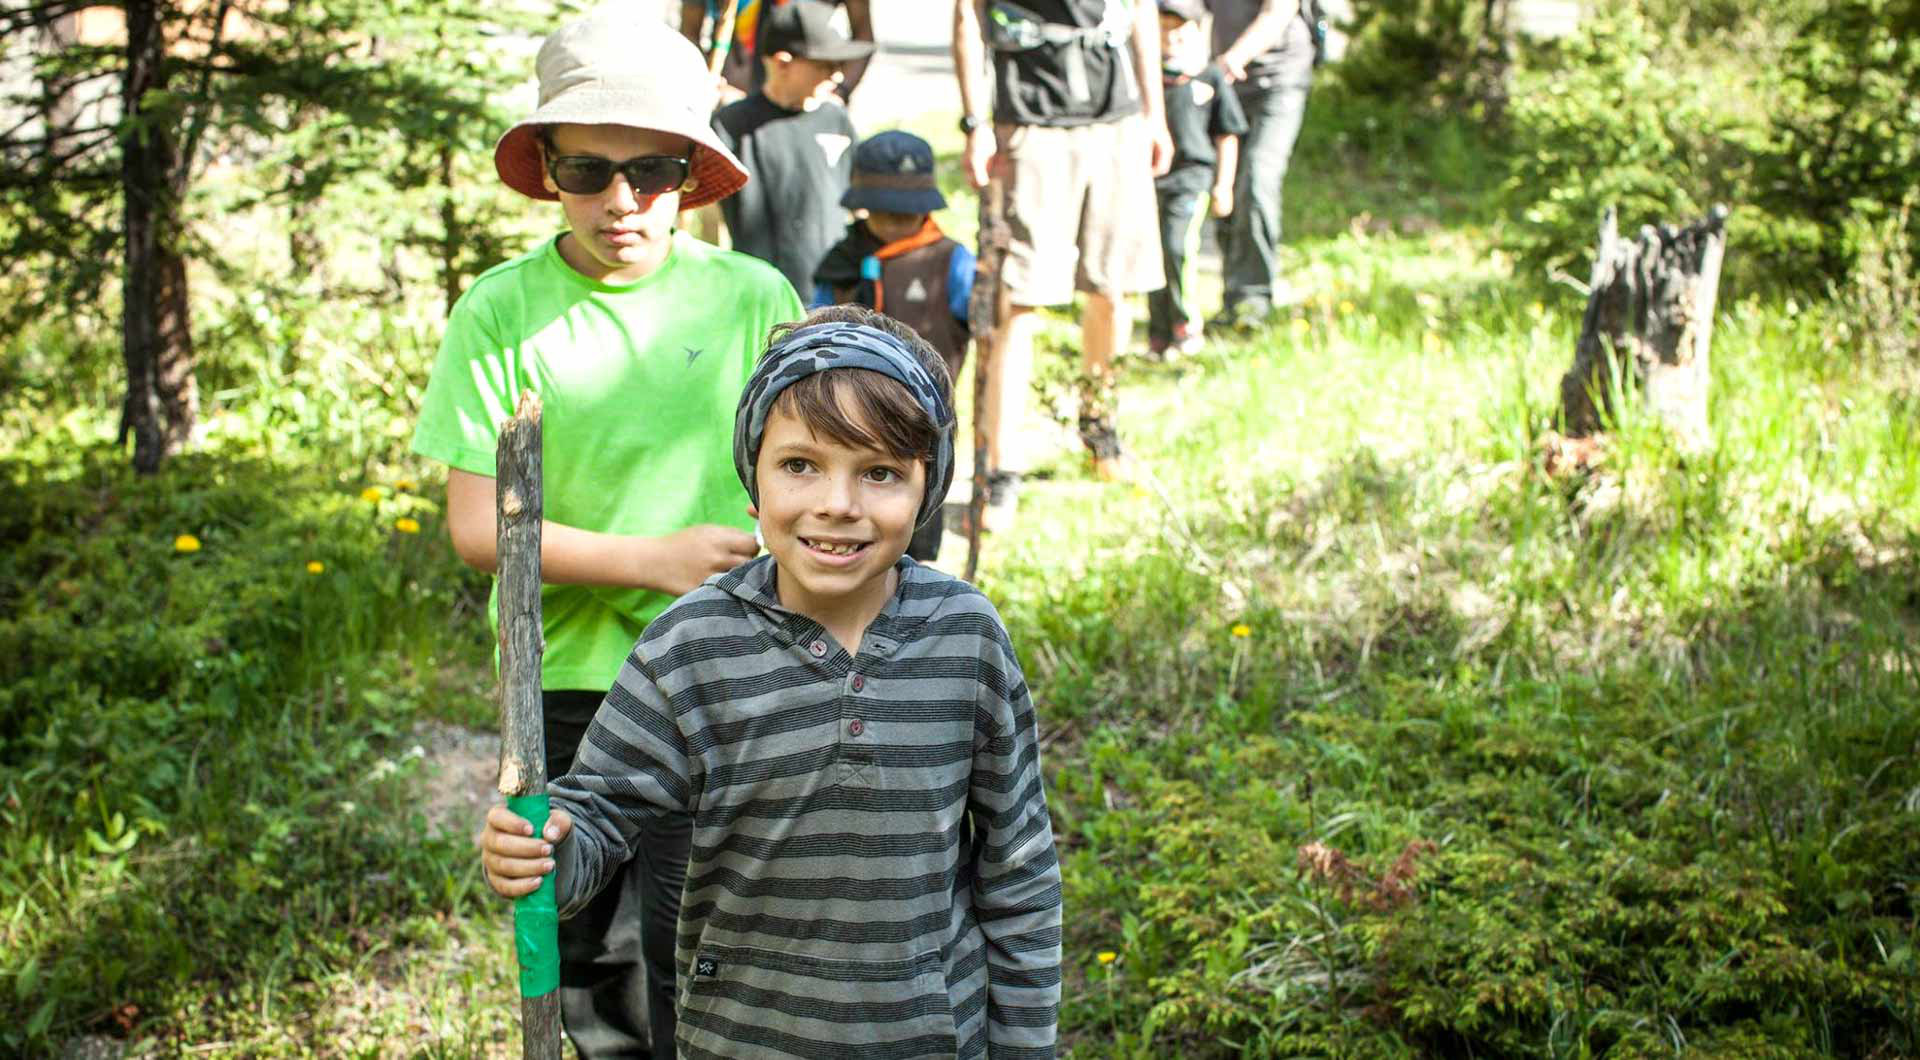 A group of young scouts hiking a trail through a forested area, and the lead person is holding a walking stick.